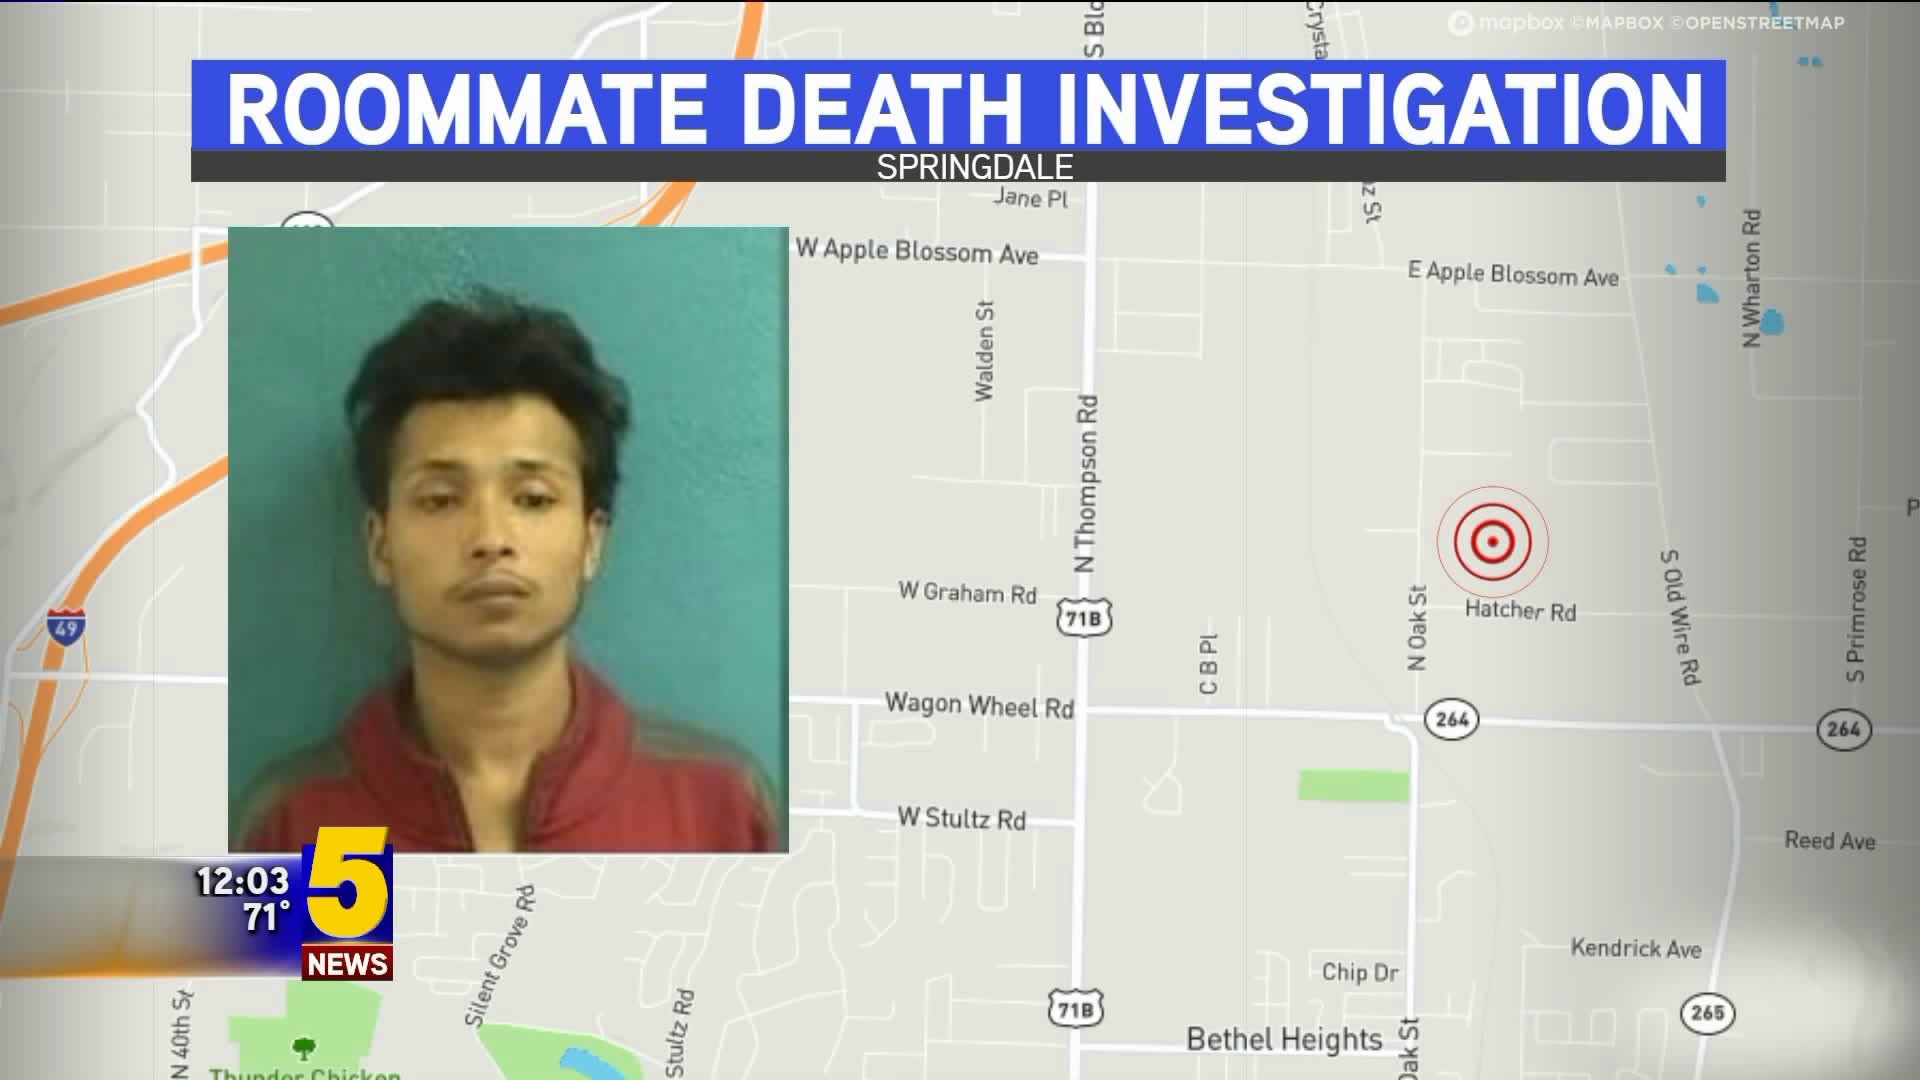 Man Pleads Guilty To First-Degree Murder In Death Of Springdale Roommate